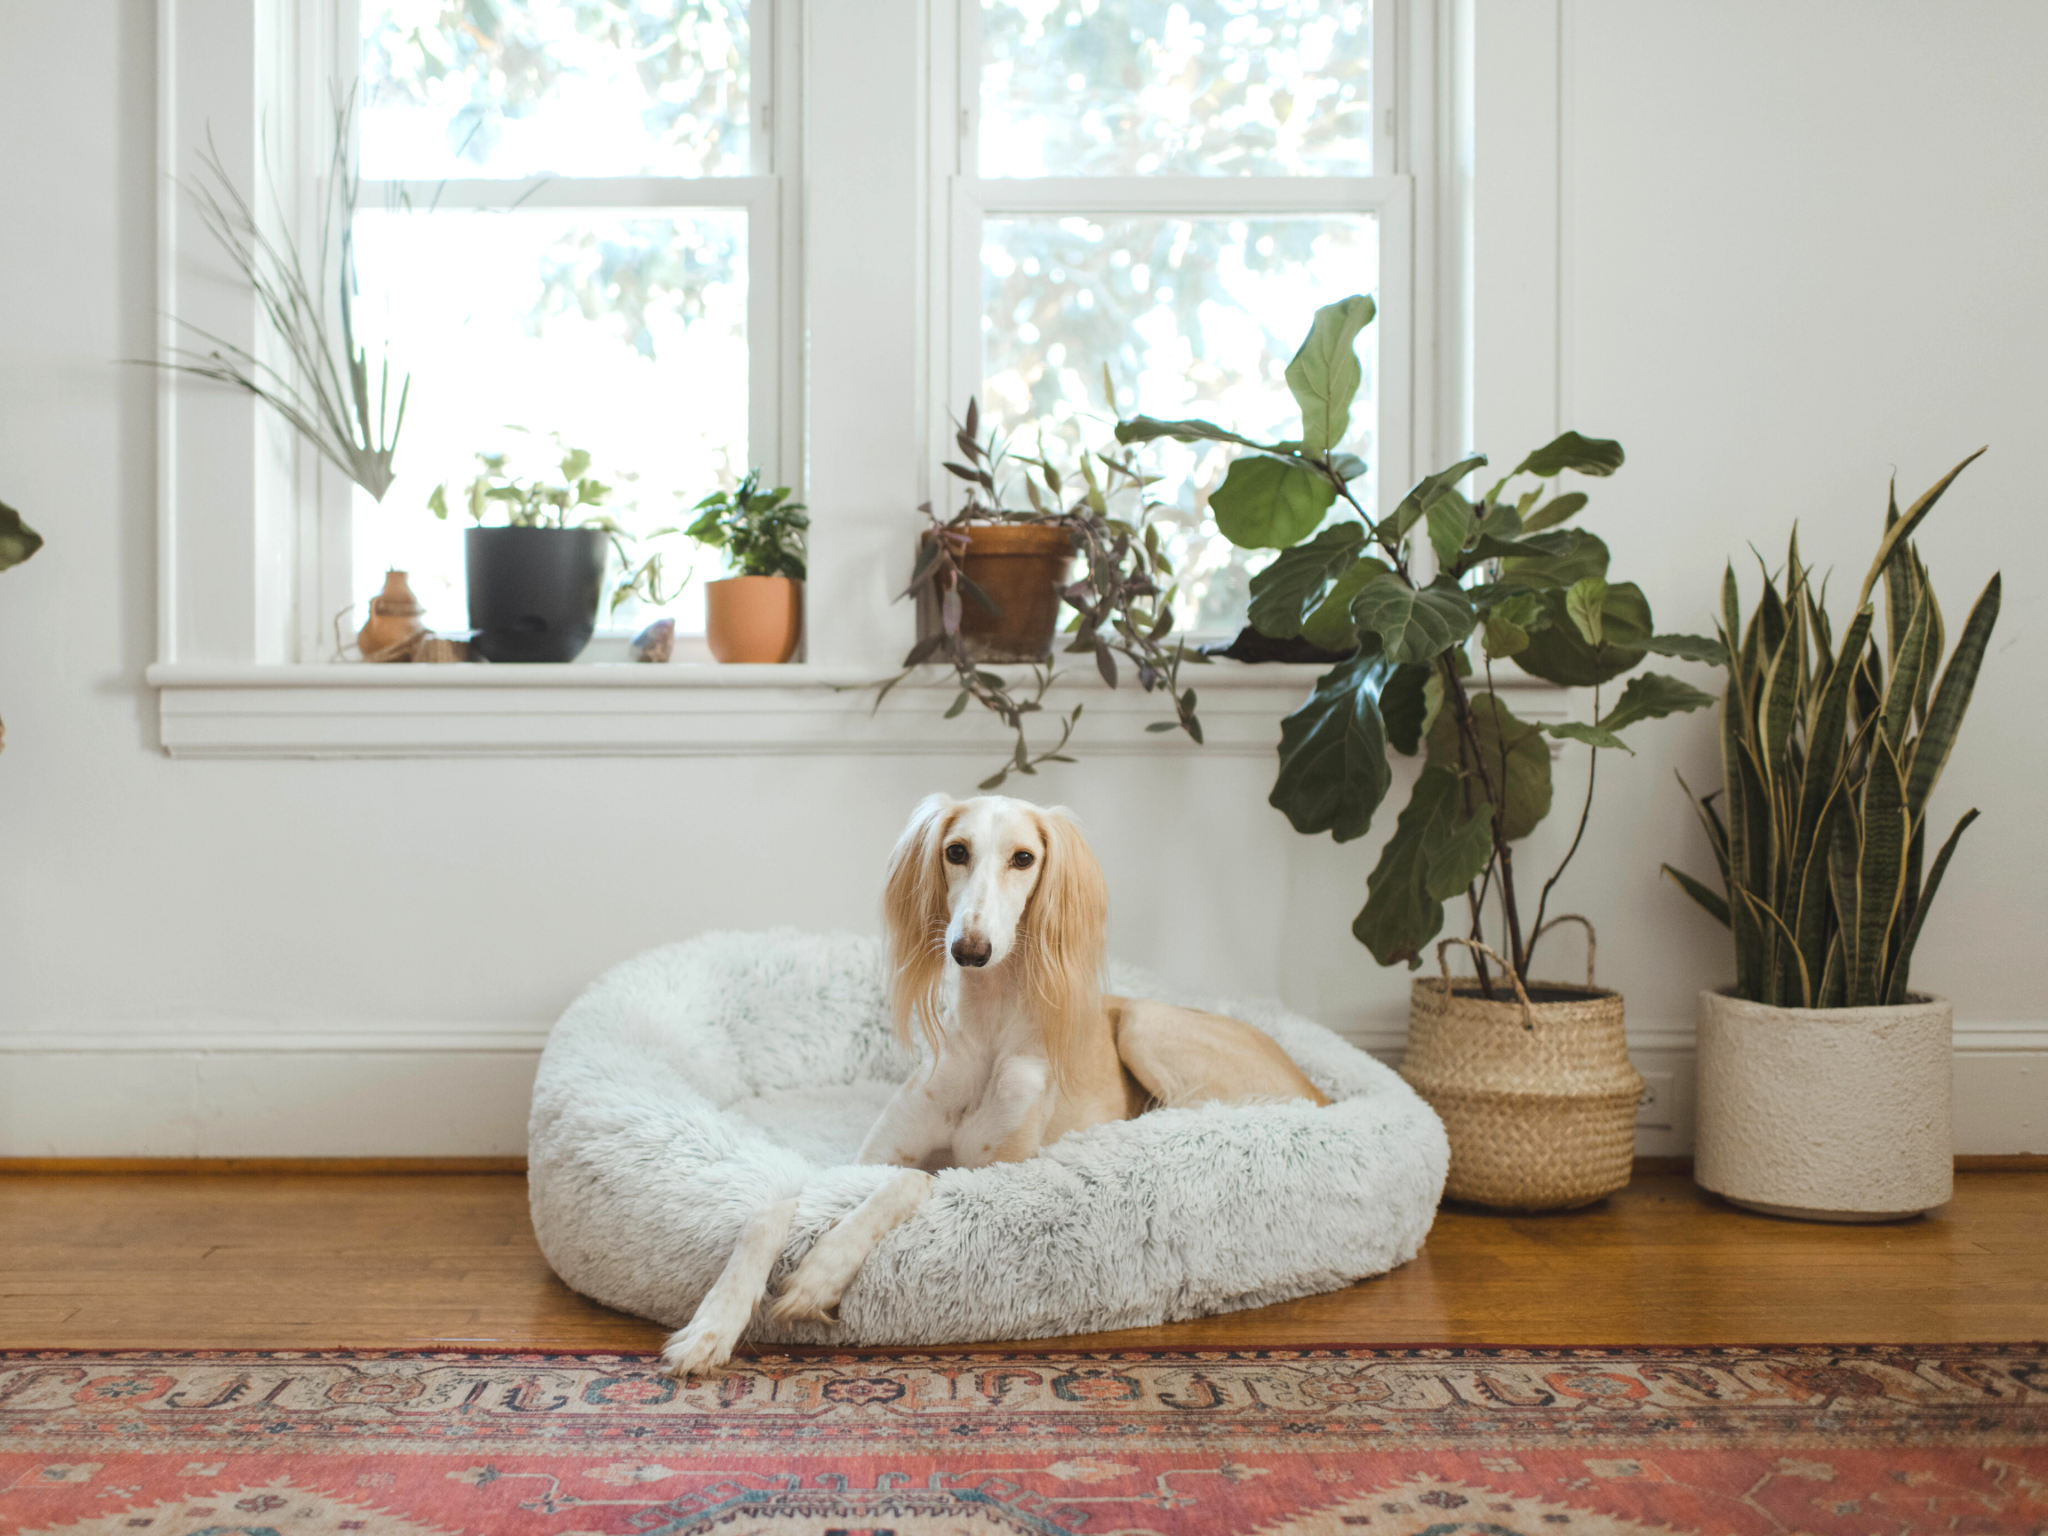 large dog sitting in dog bed next to plants in home